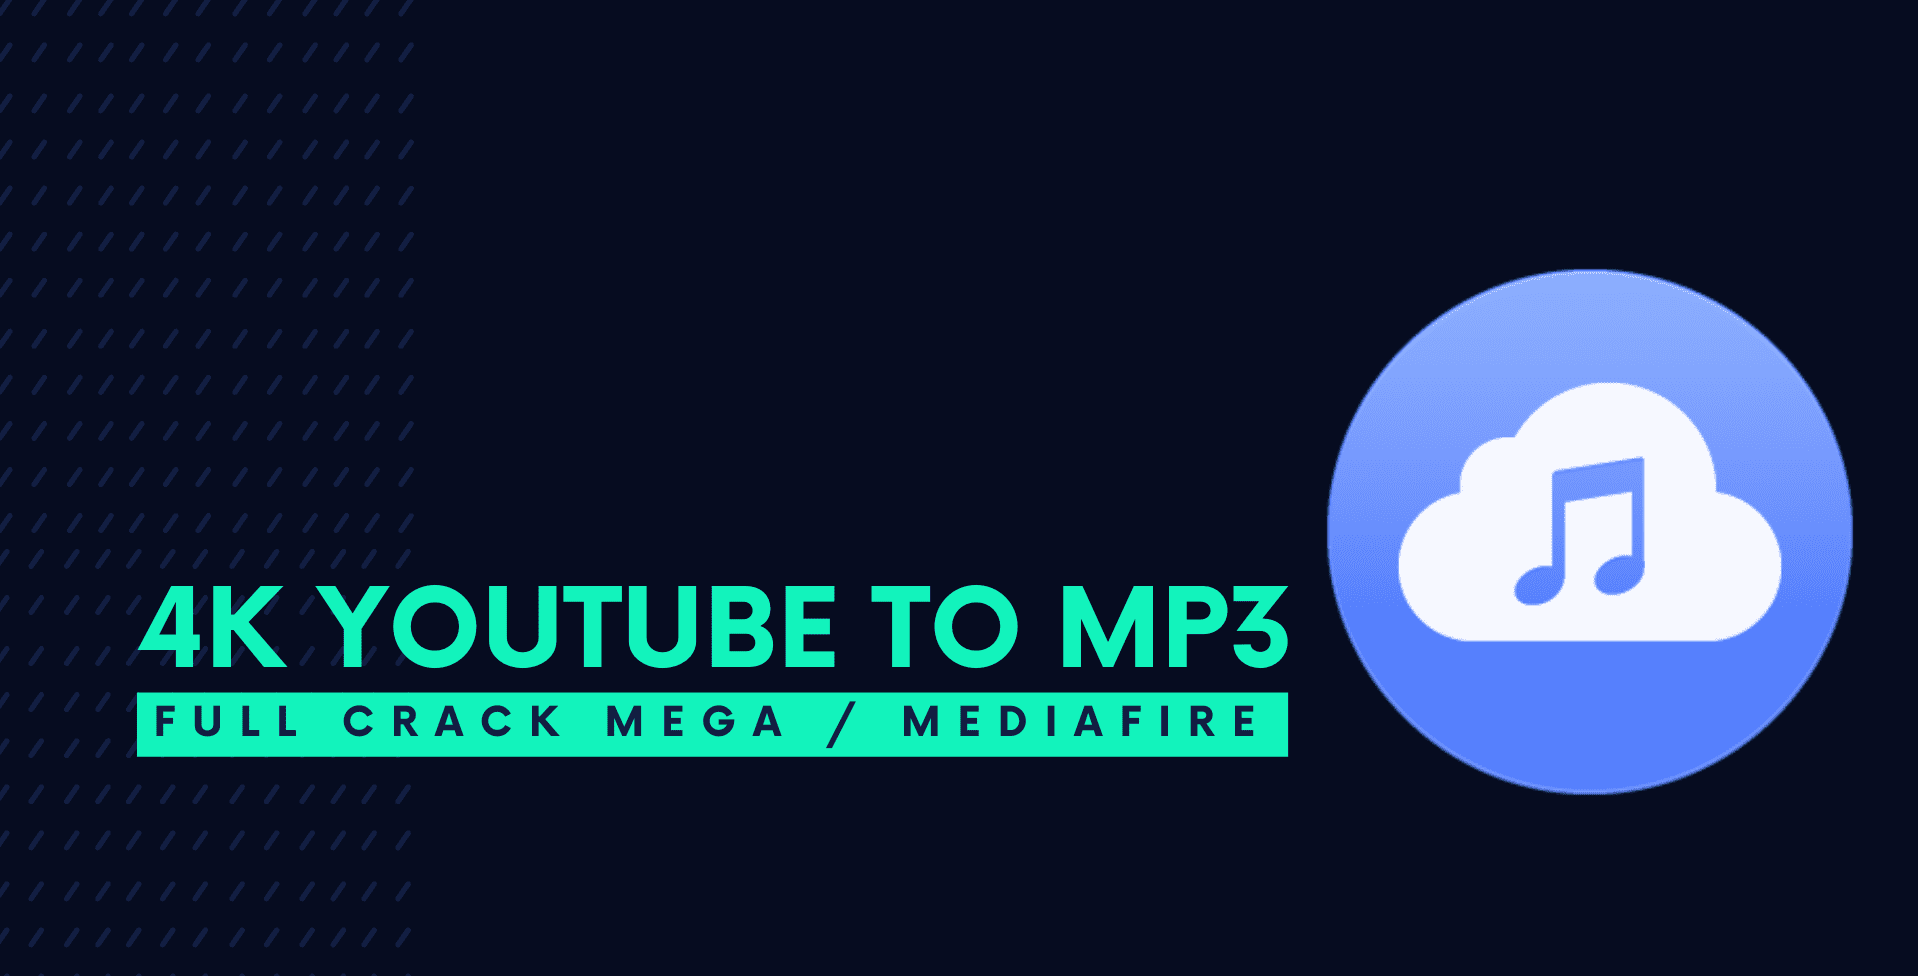 "4K YouTube to MP3 Crack" - A software for converting YouTube videos to MP3 format, offering high-quality audio extraction.